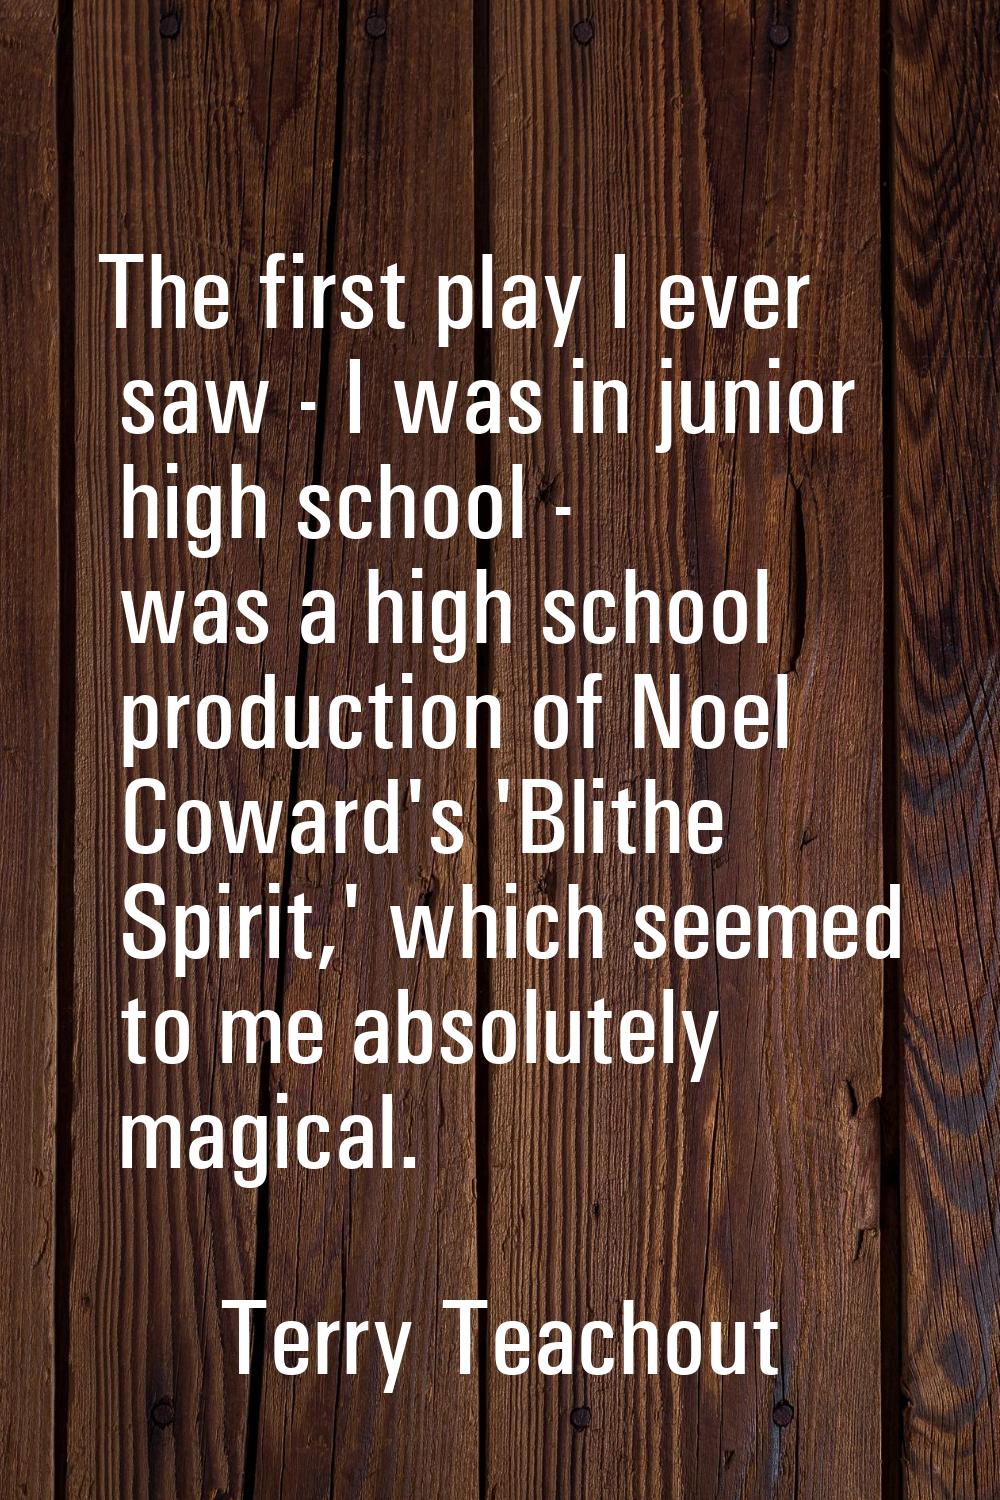 The first play I ever saw - I was in junior high school - was a high school production of Noel Cowa